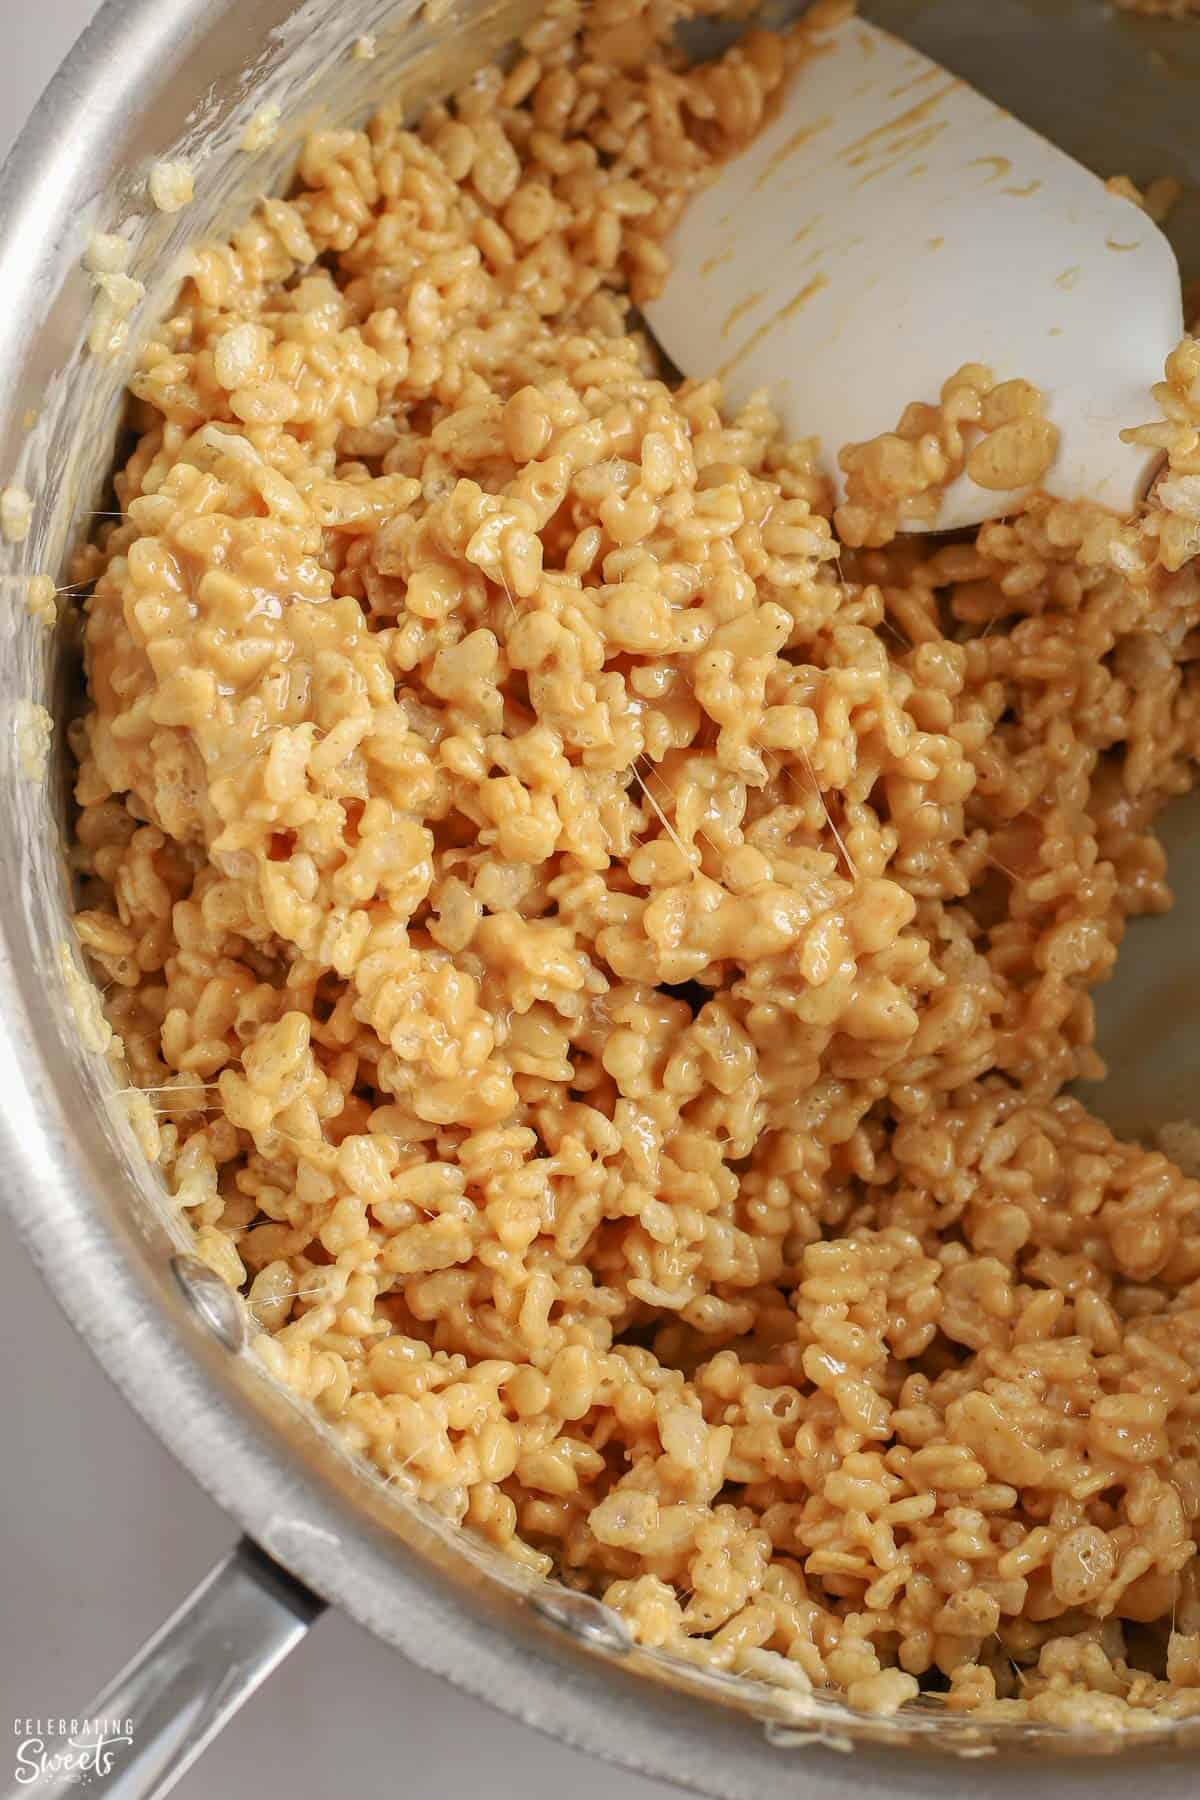 Peanut butter rice krispies in a large saucepan with a white spatula.